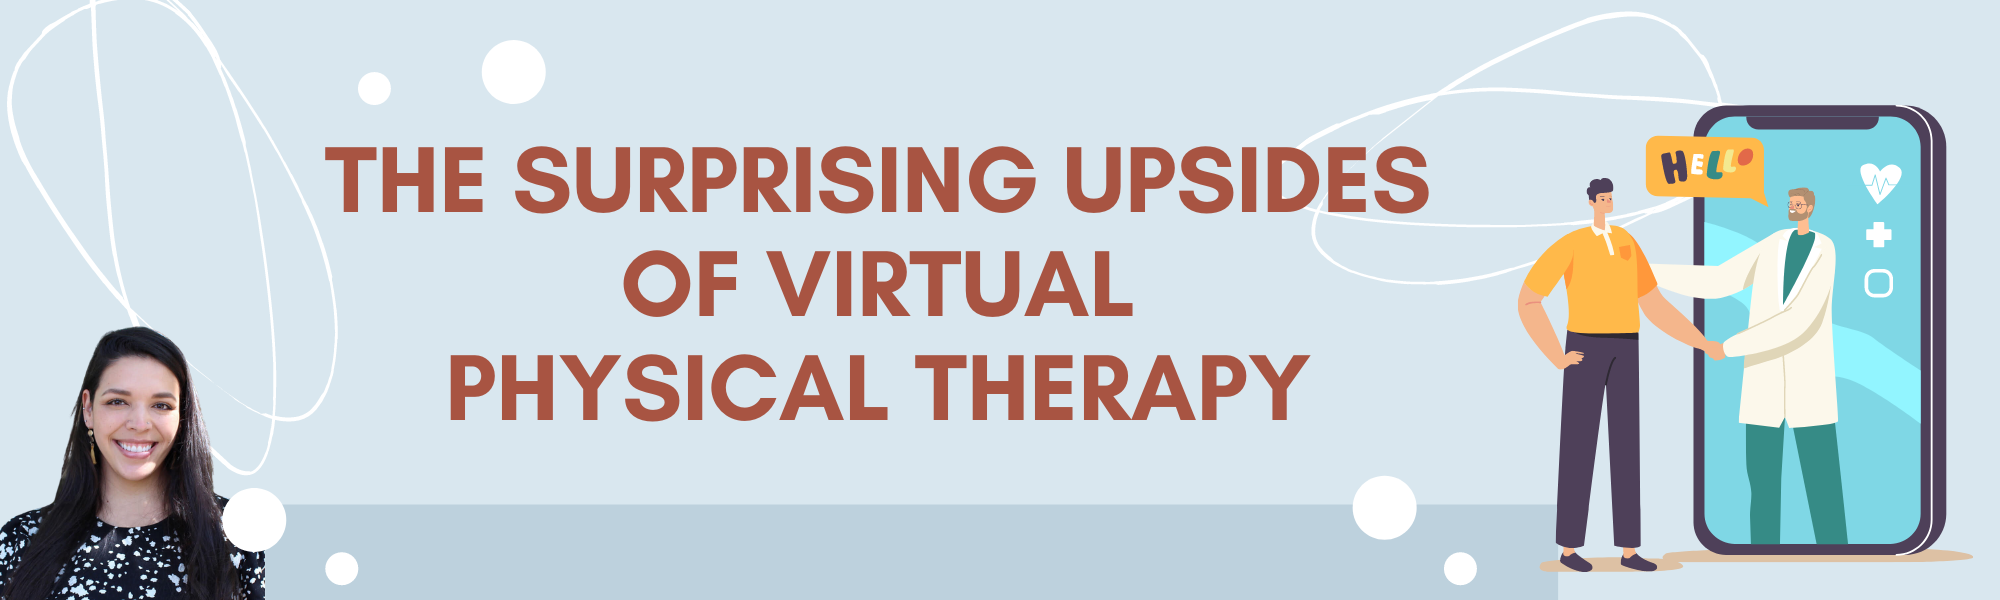 The Surprising Upsides of Virtual Physical Therapy